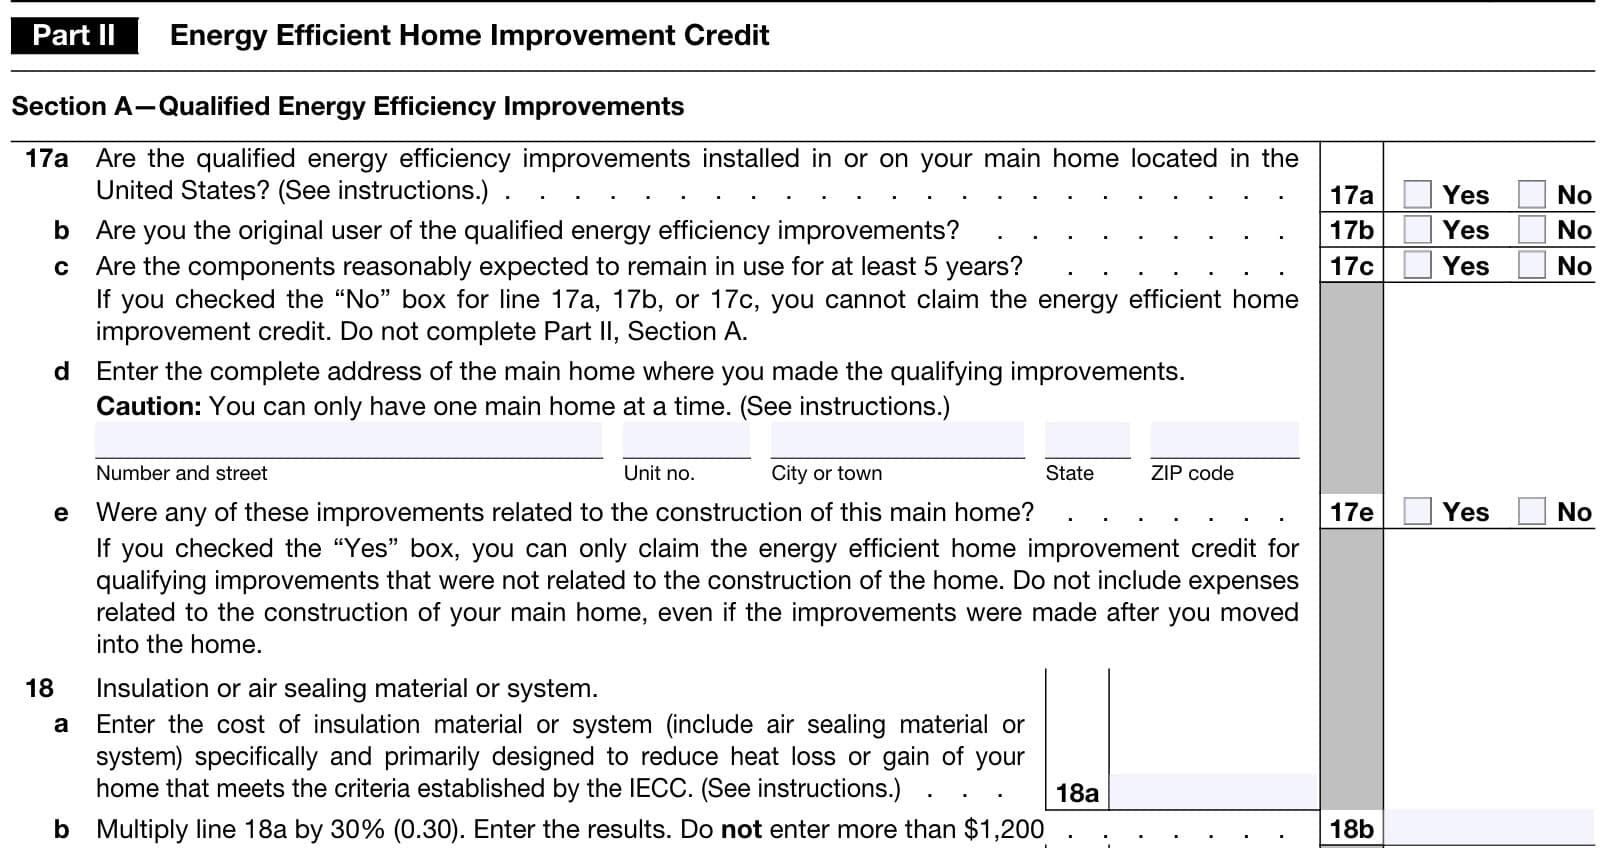 irs form 5695, part II, section a: qualified energy efficiency improvements